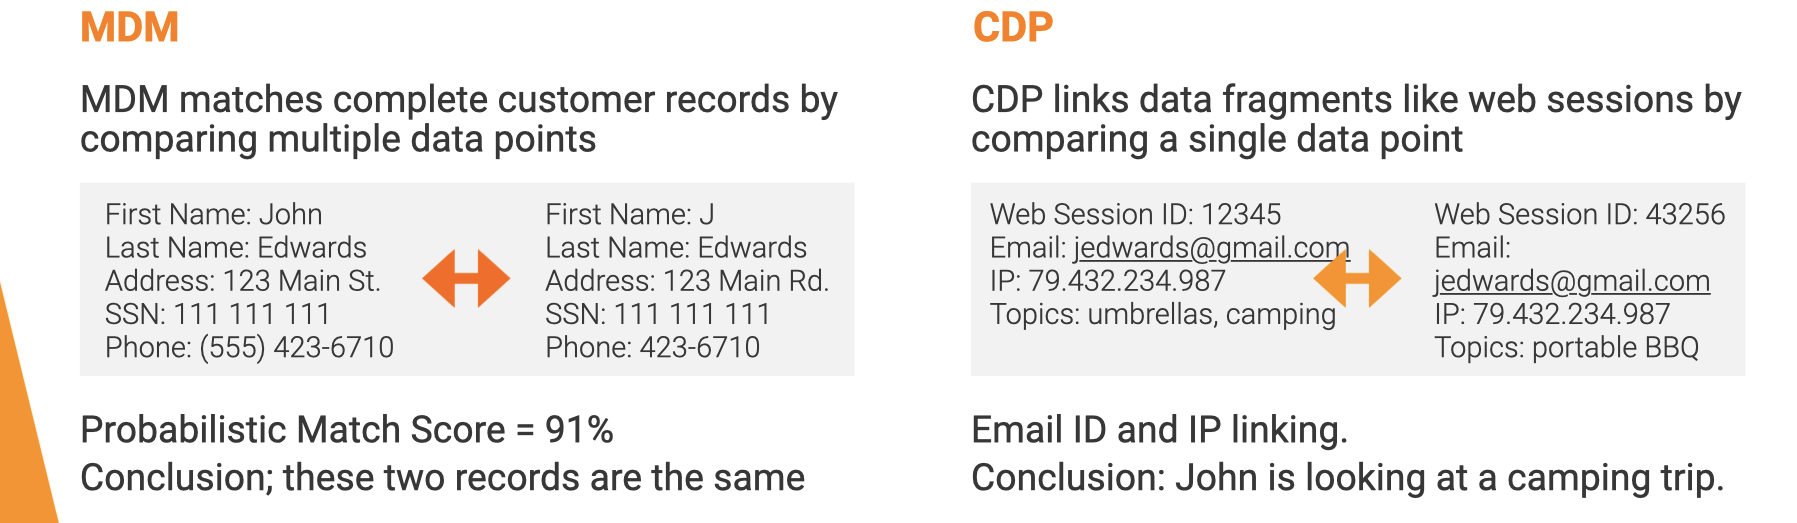 A graphic showing the differences between MDM and CDP actions and use cases.